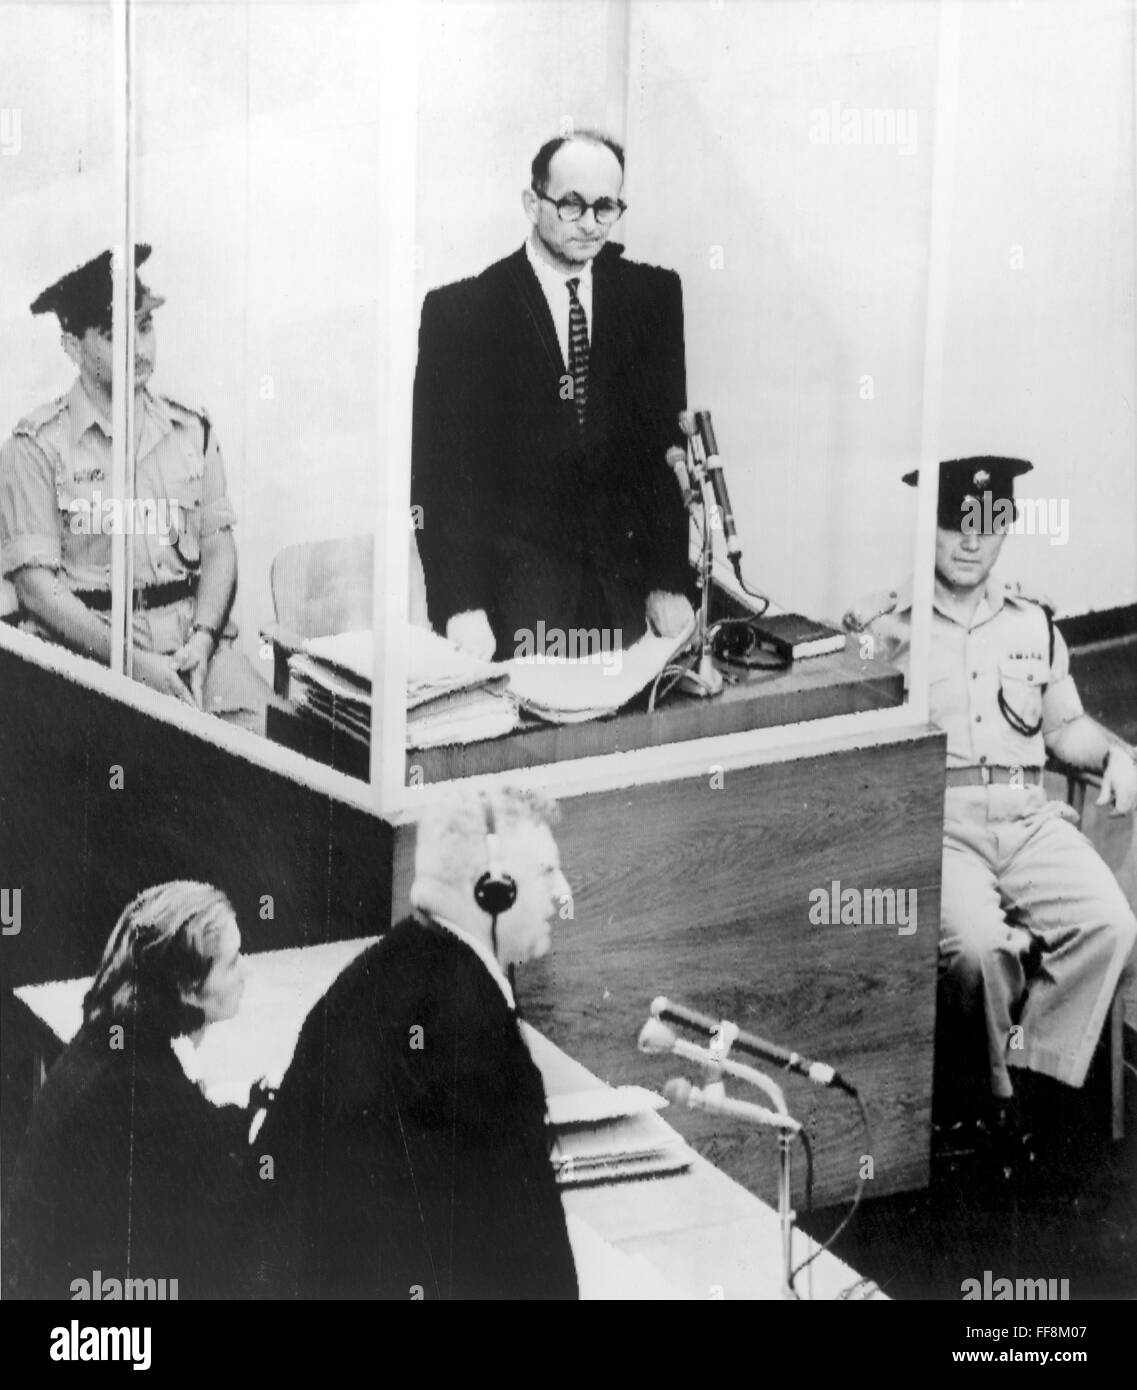 ADOLF EICHMANN (1906-1962). /nGerman Nazi leader and SS officer. Eichmann, enclosed in a bulletproof glass booth, giving evidence in his defense at his trial in Jerusalem on 20 June 1961. In the foreground is Eichmann's attorney, Robert Servatius. Stock Photo